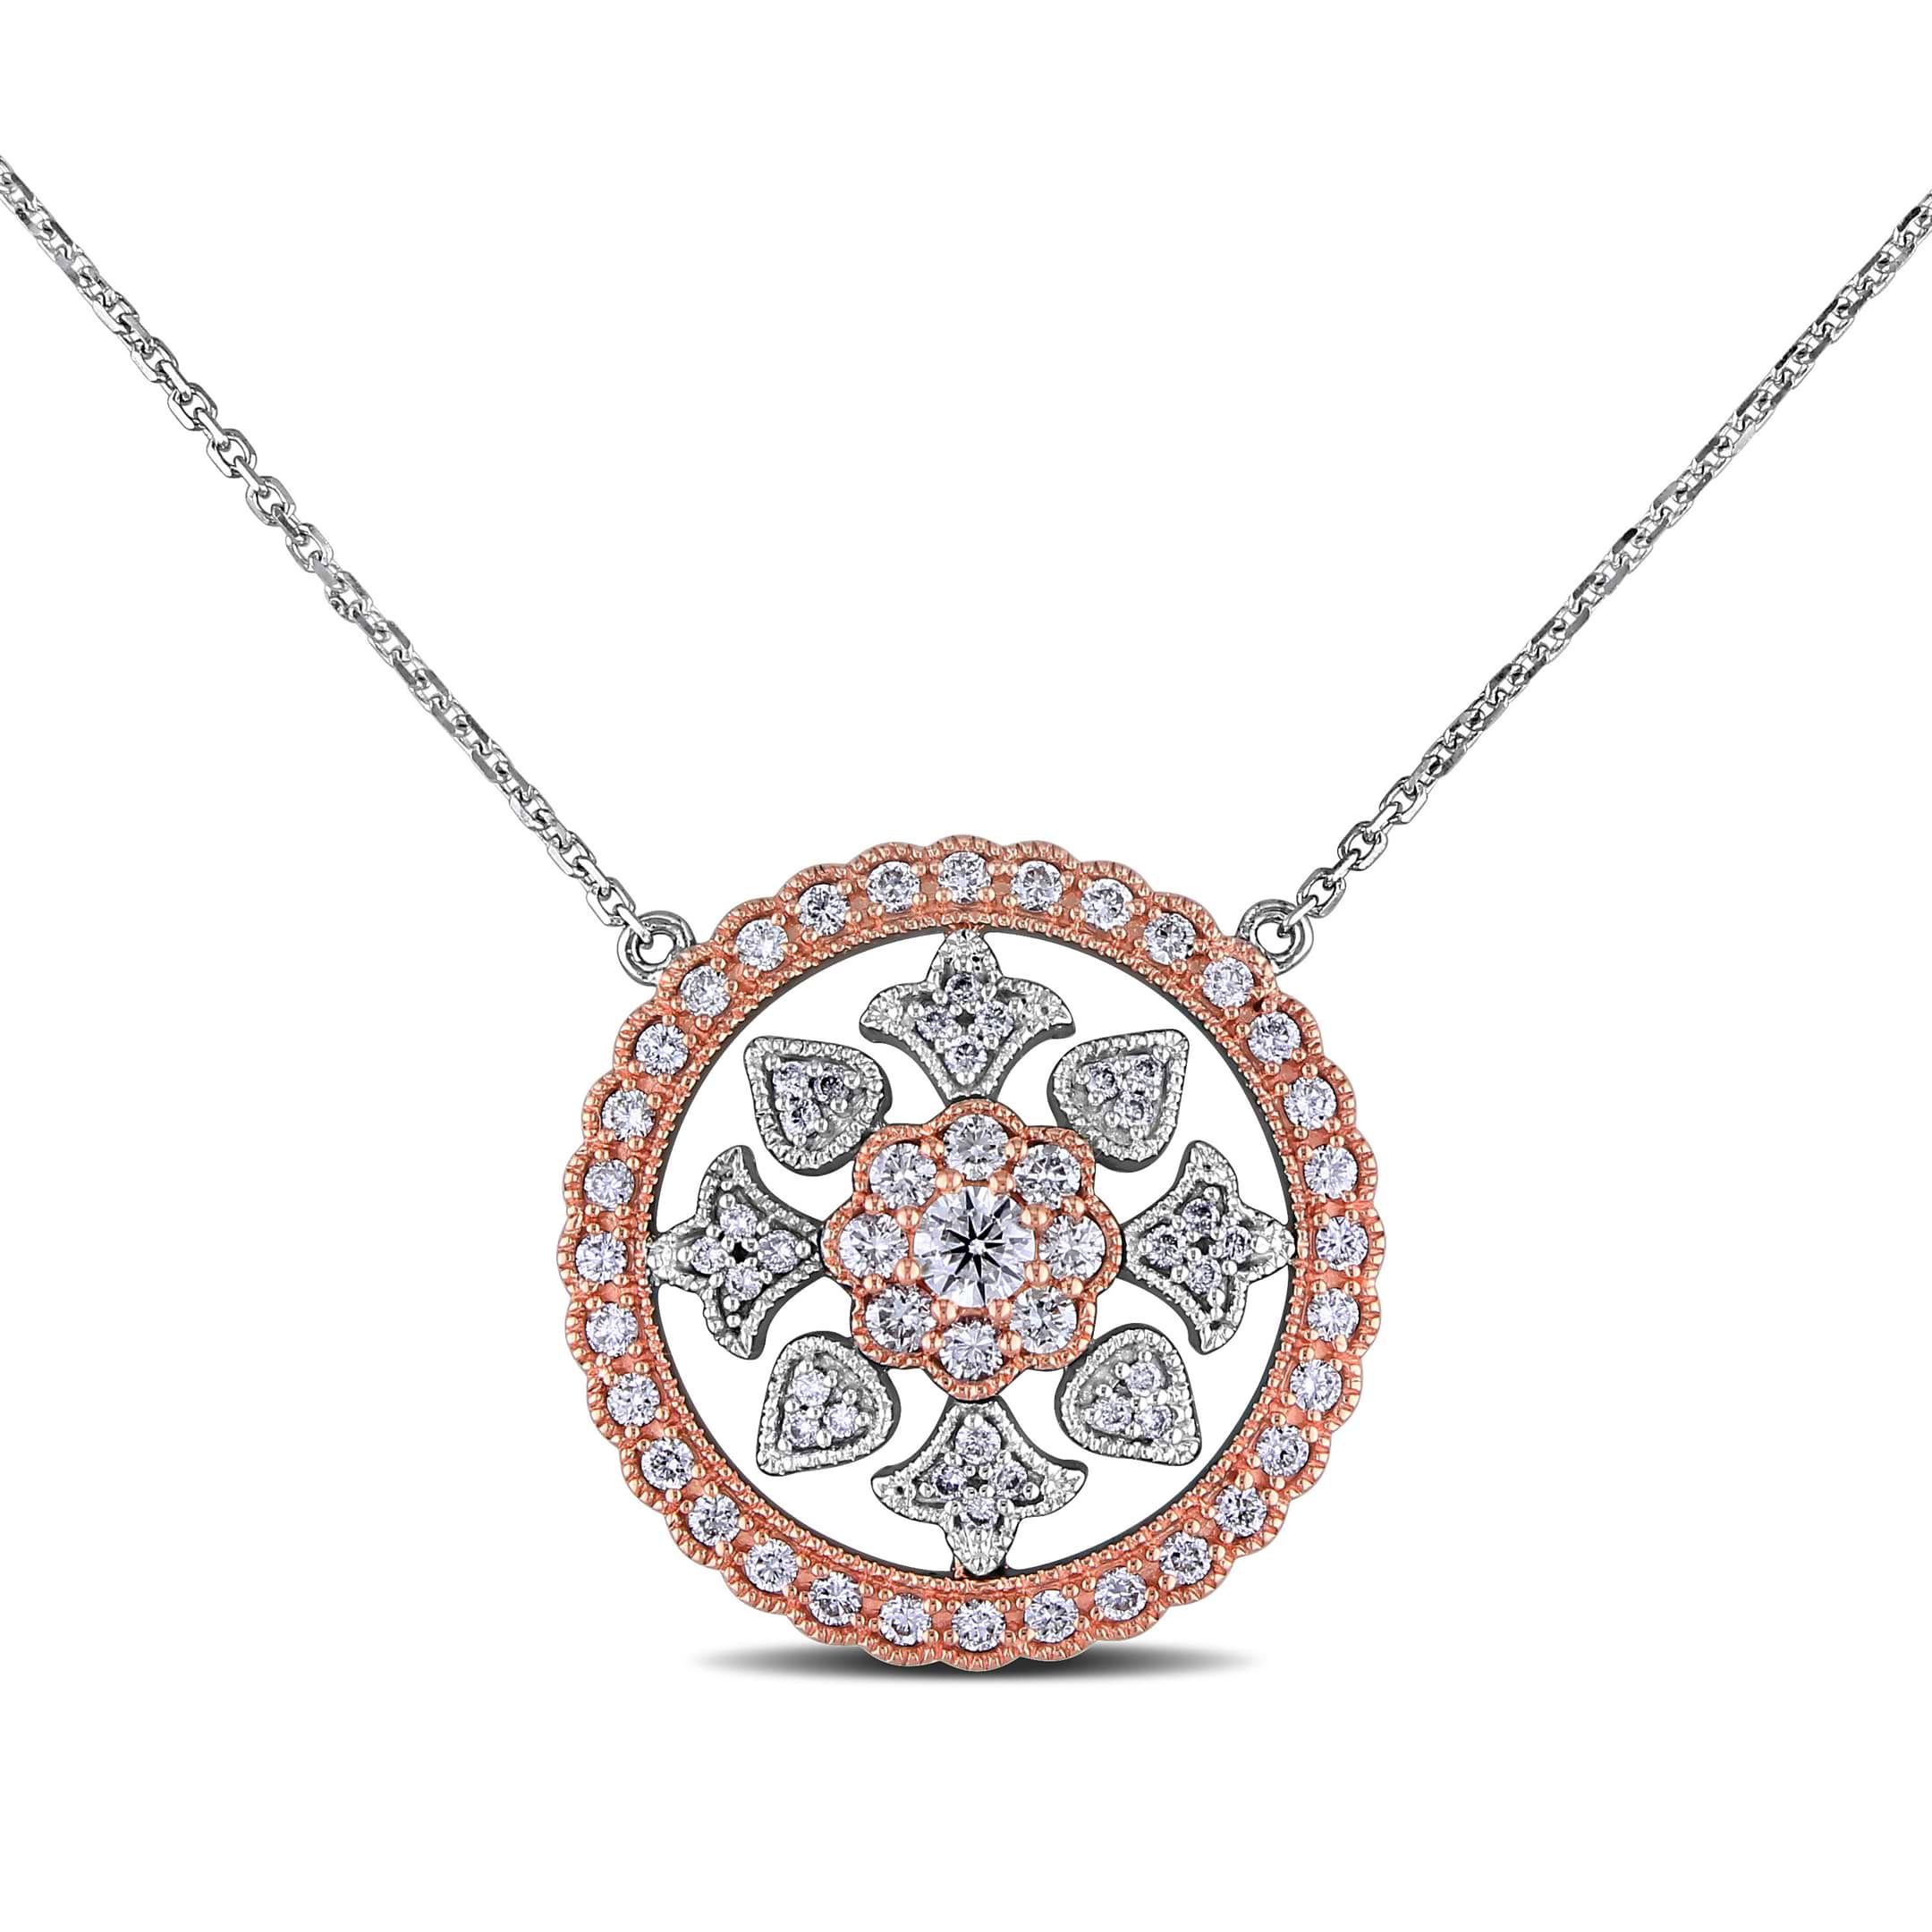 Diamond Circular Floral Pendant Necklace 14k Two Tone Gold (0.44ct)